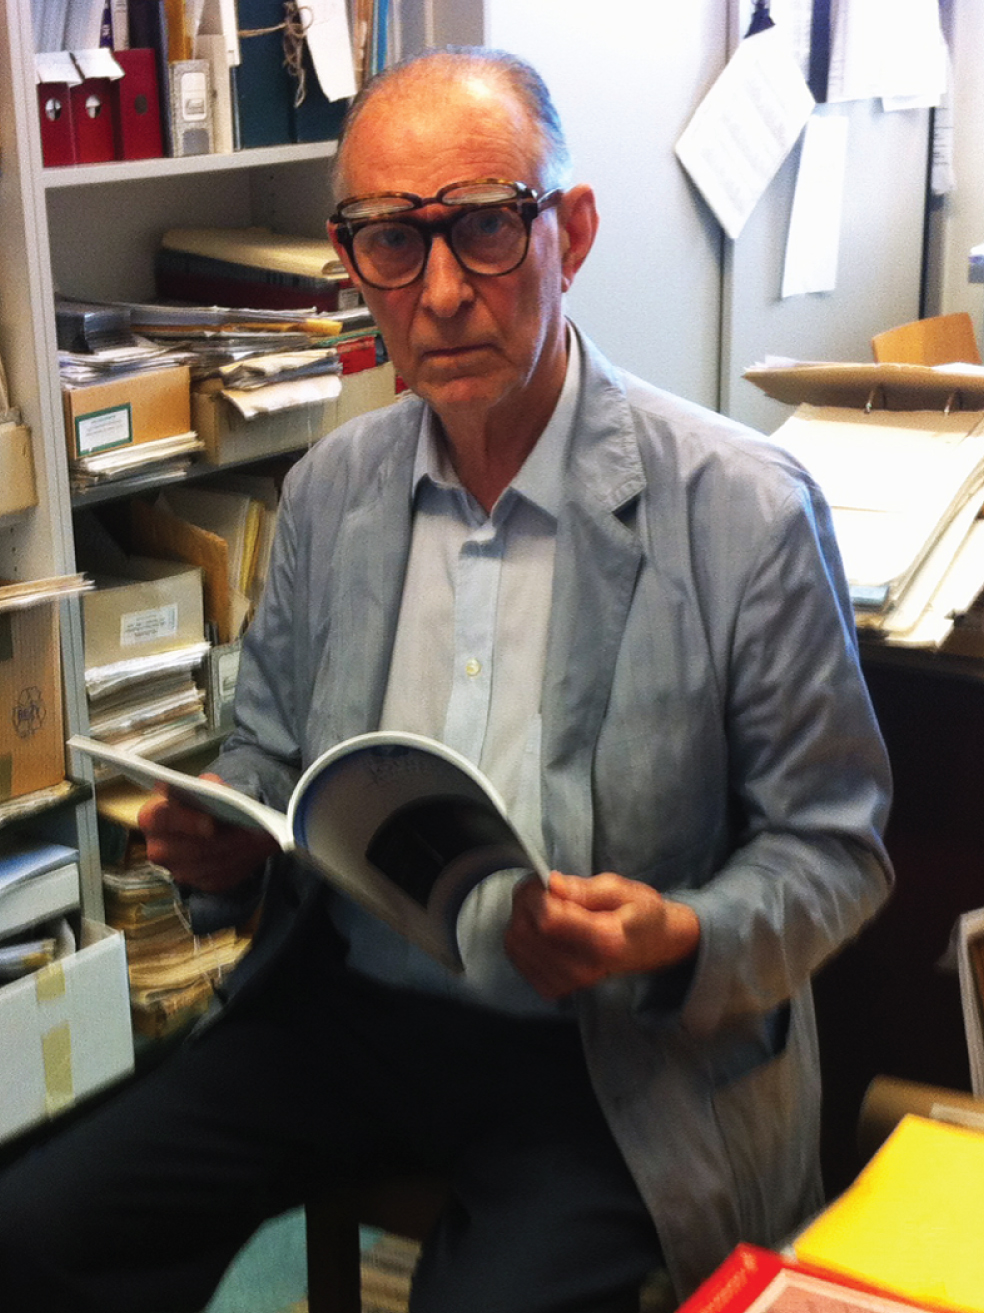 Oleh Hornykiewicz in his Viennese office wearing his famous spectacles.